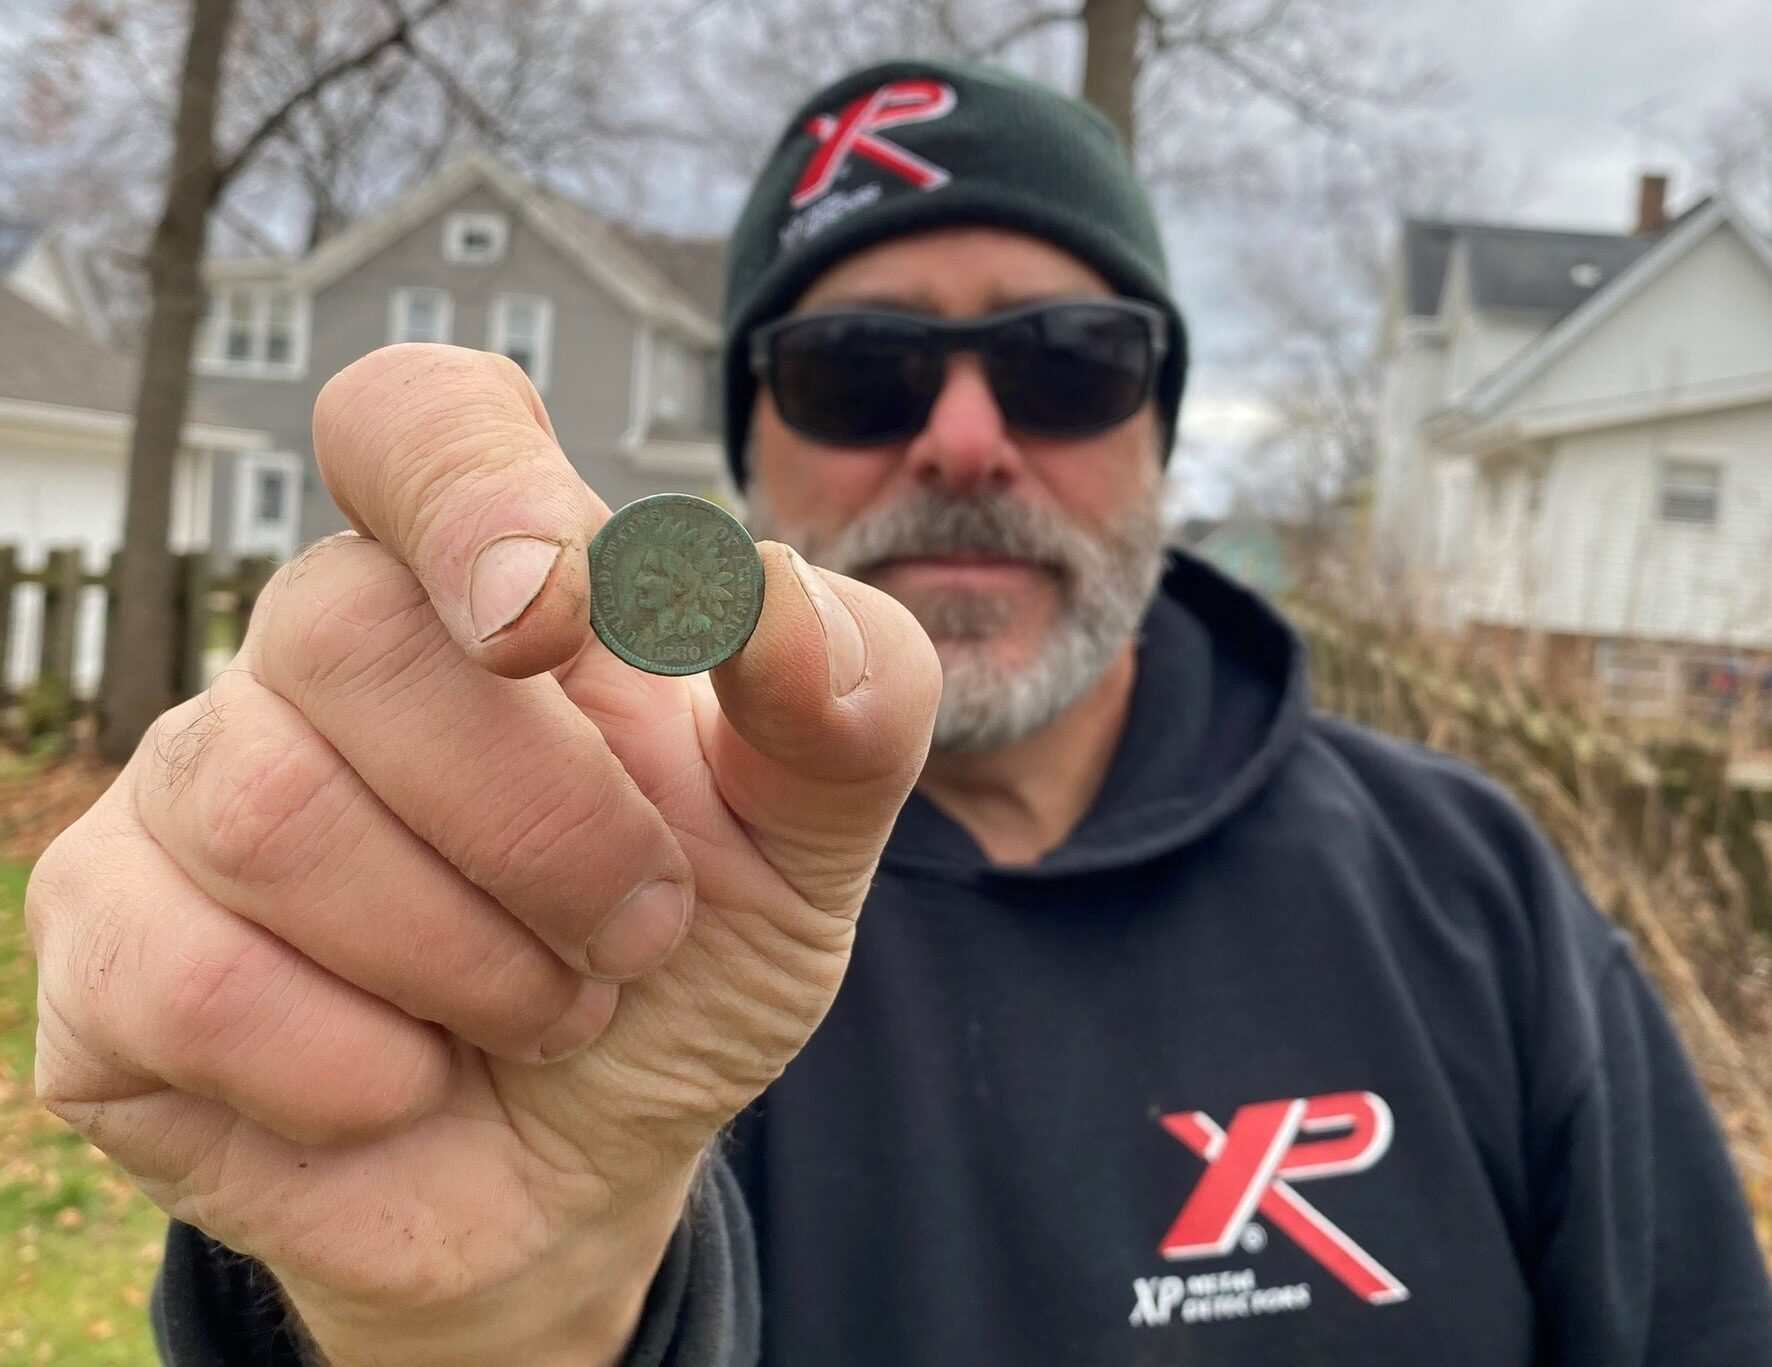 In metal detecting, history matters more than the treasure found in Wisconsin